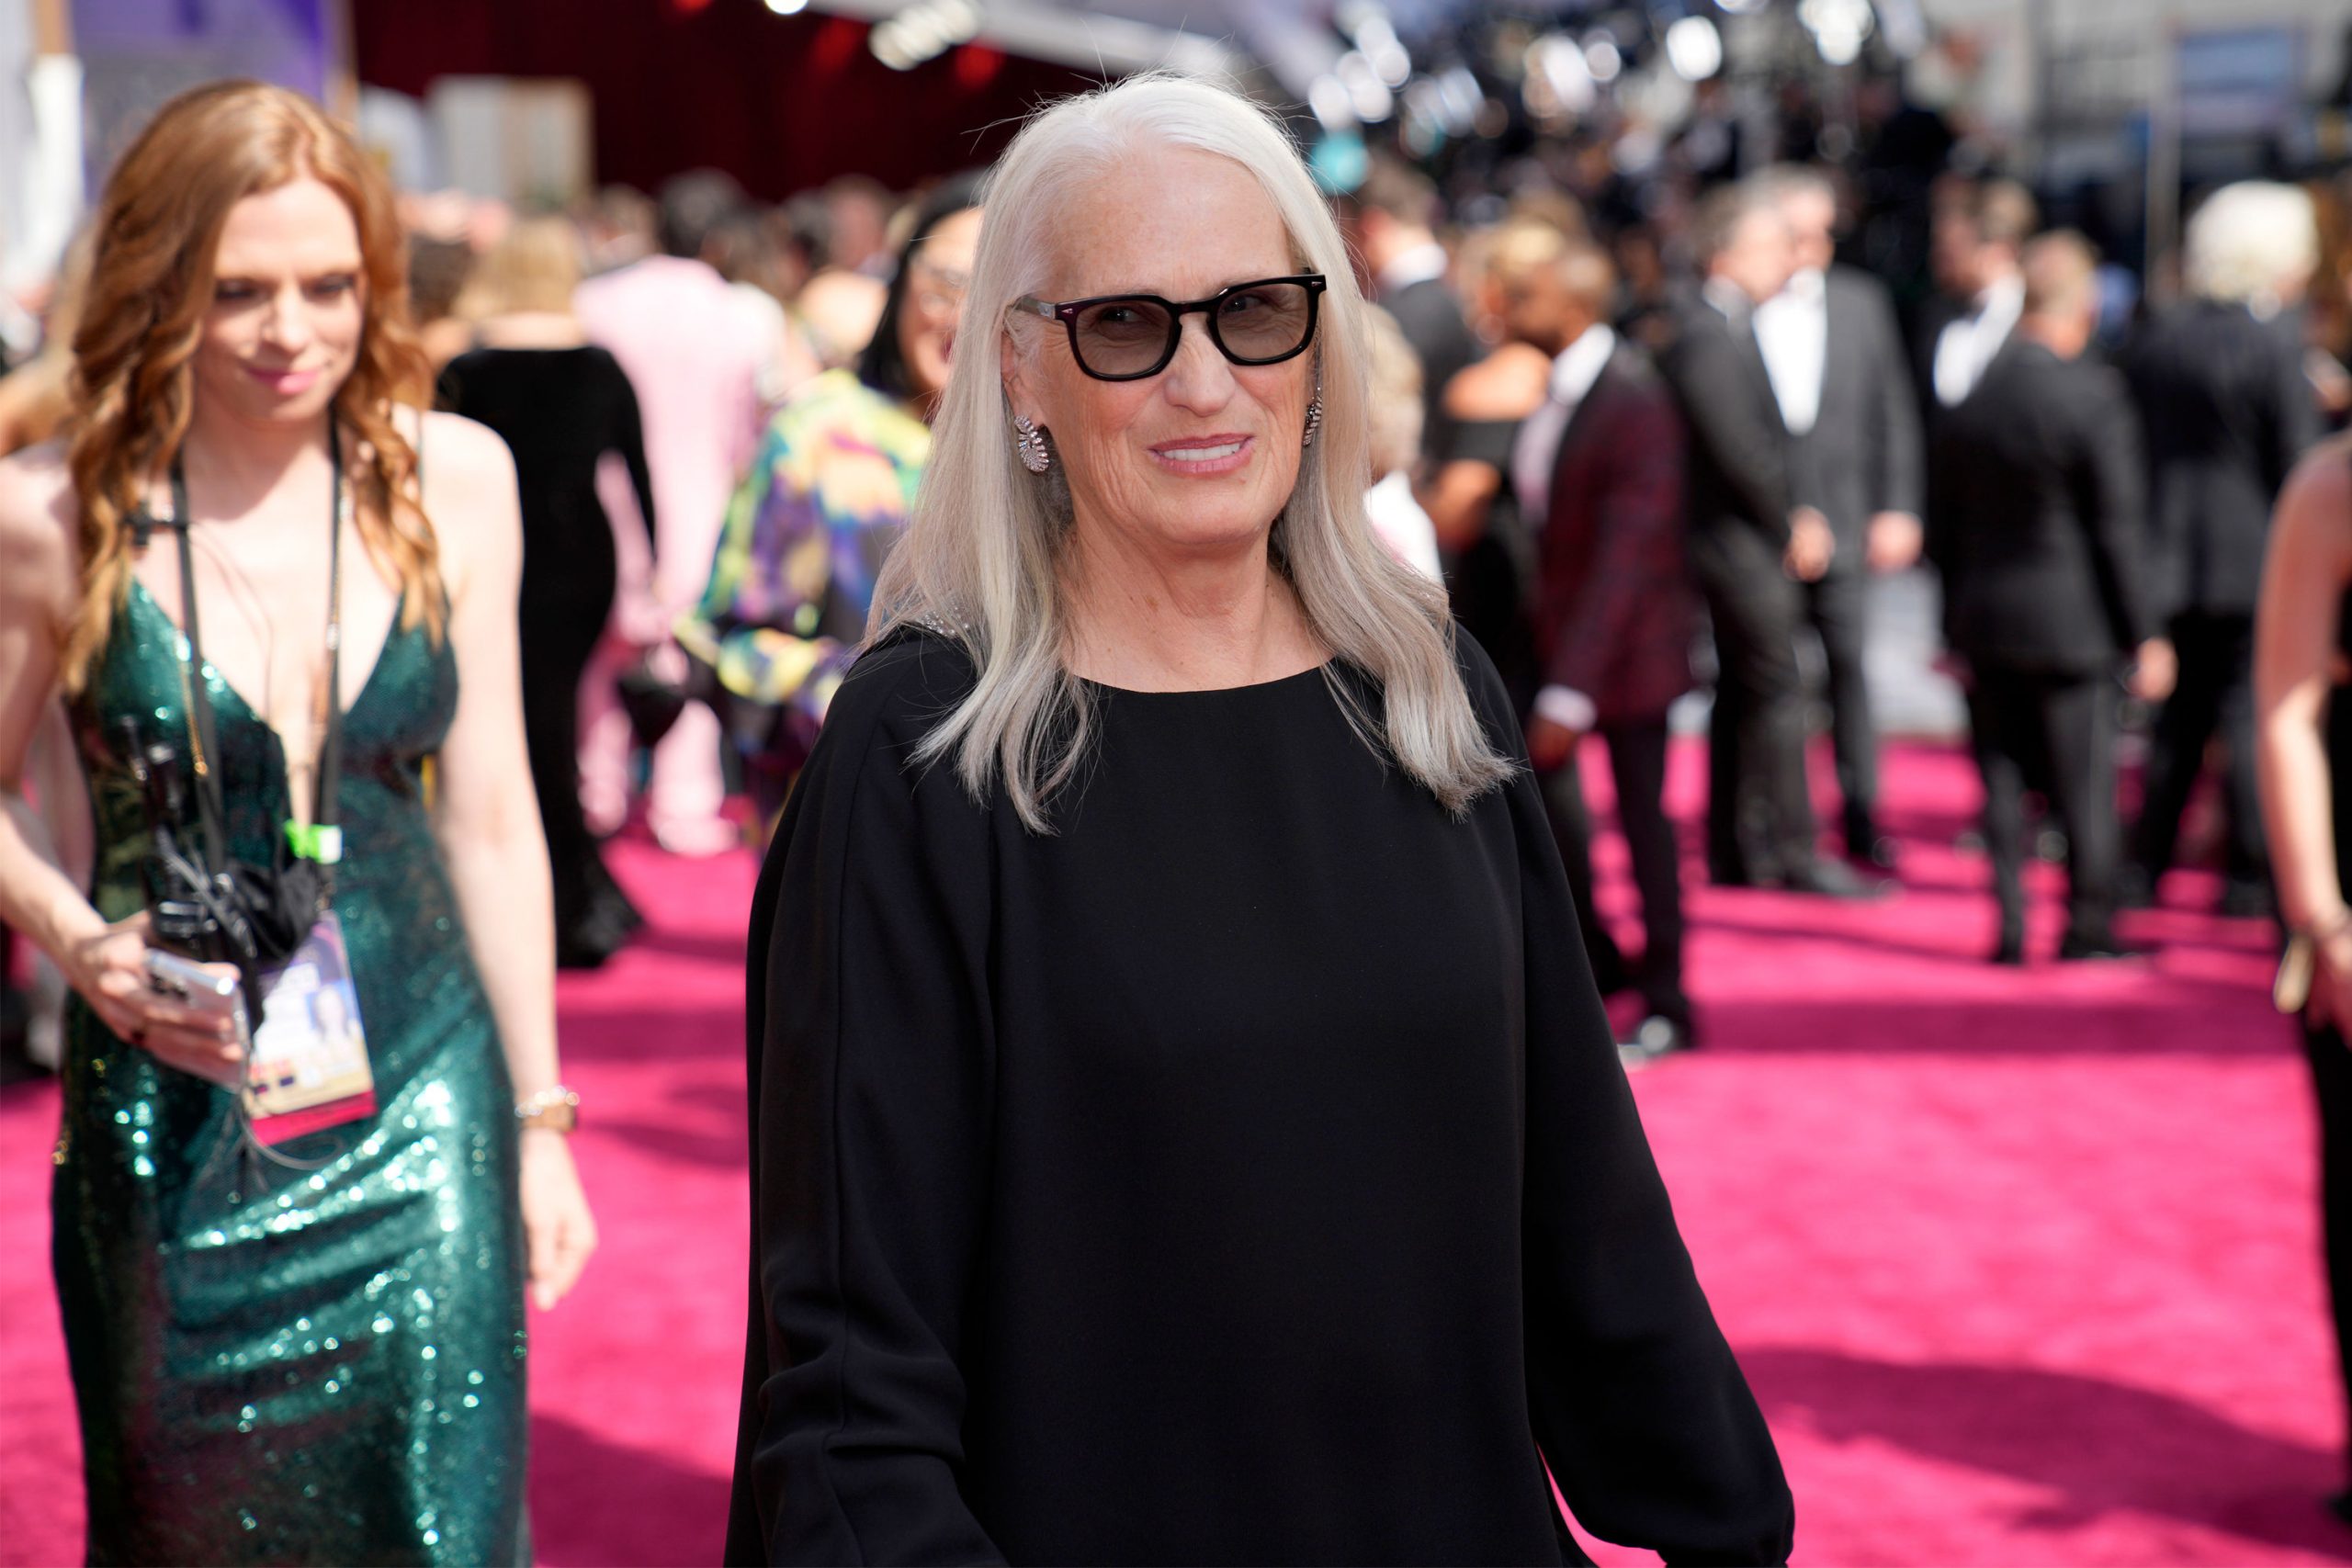 Oscars 2022: Jane Campion wins best director for ‘The Power of the Dog’